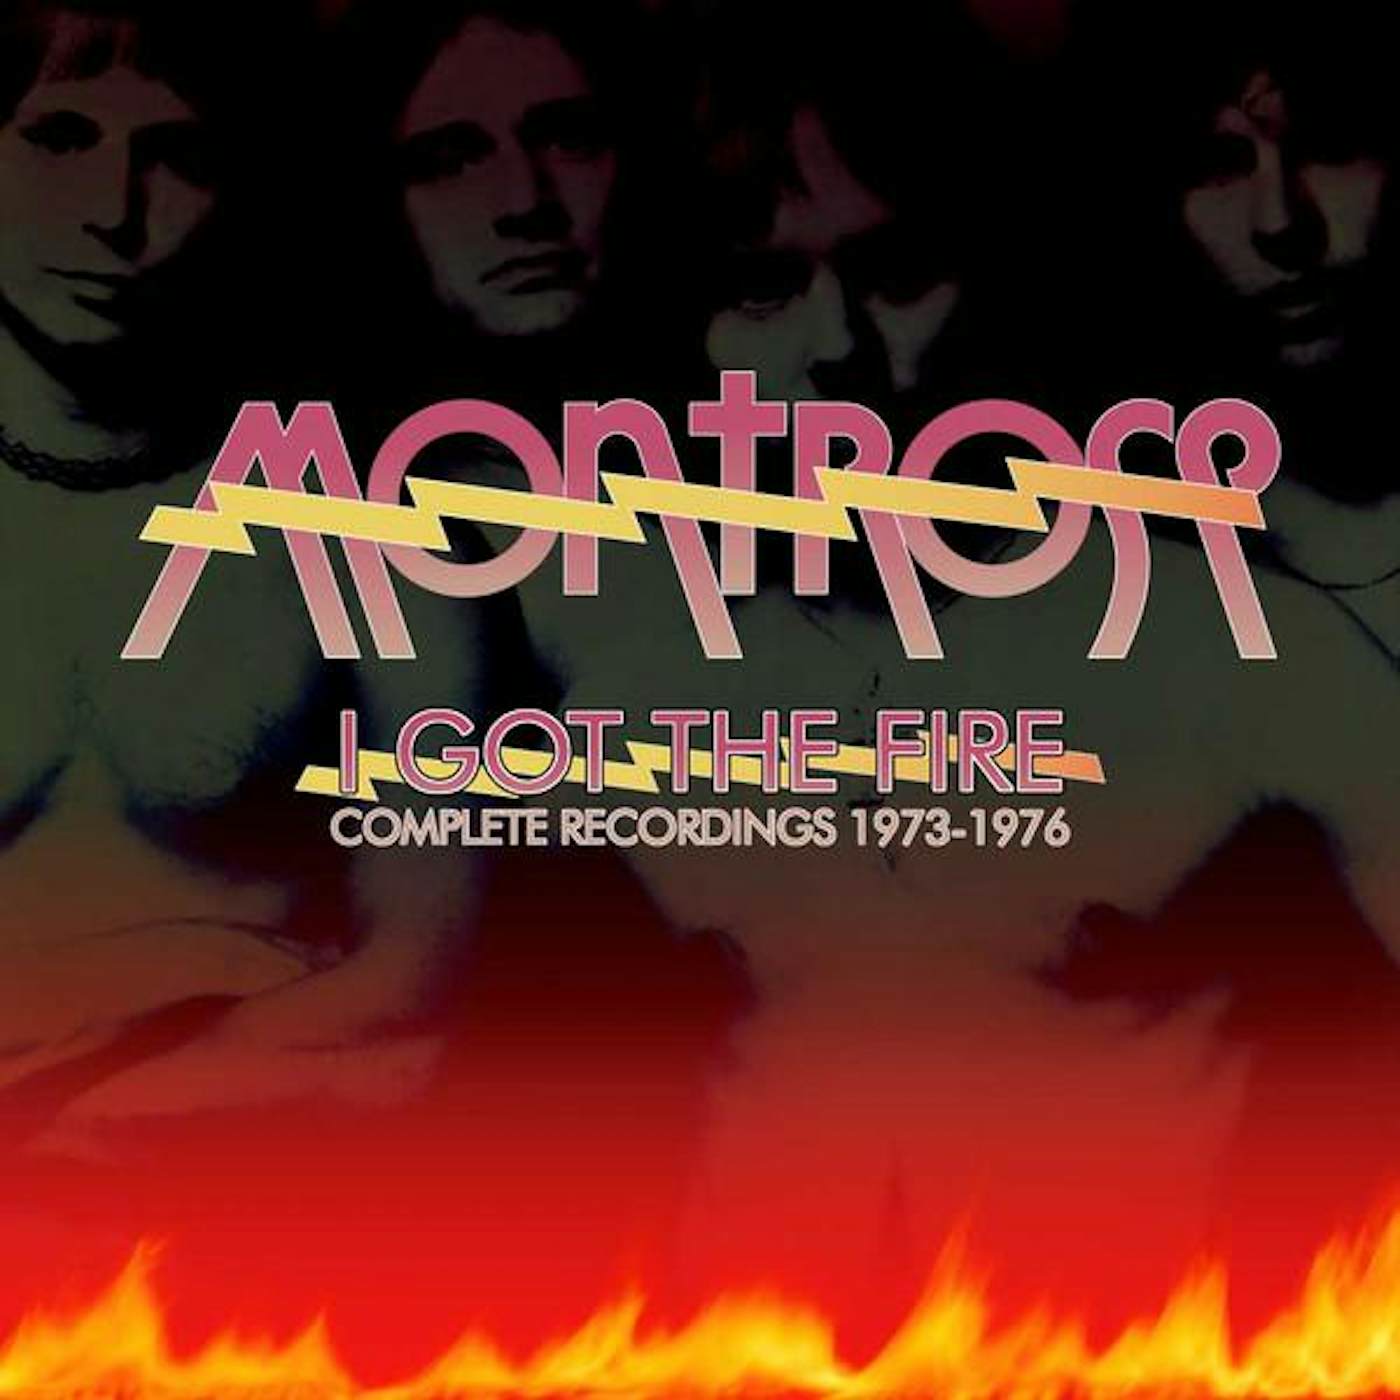 Montrose I GOT THE FIRE: COMPLETE RECORDINGS 1973-1976 (6CD CLAMSHELL BOX) CD